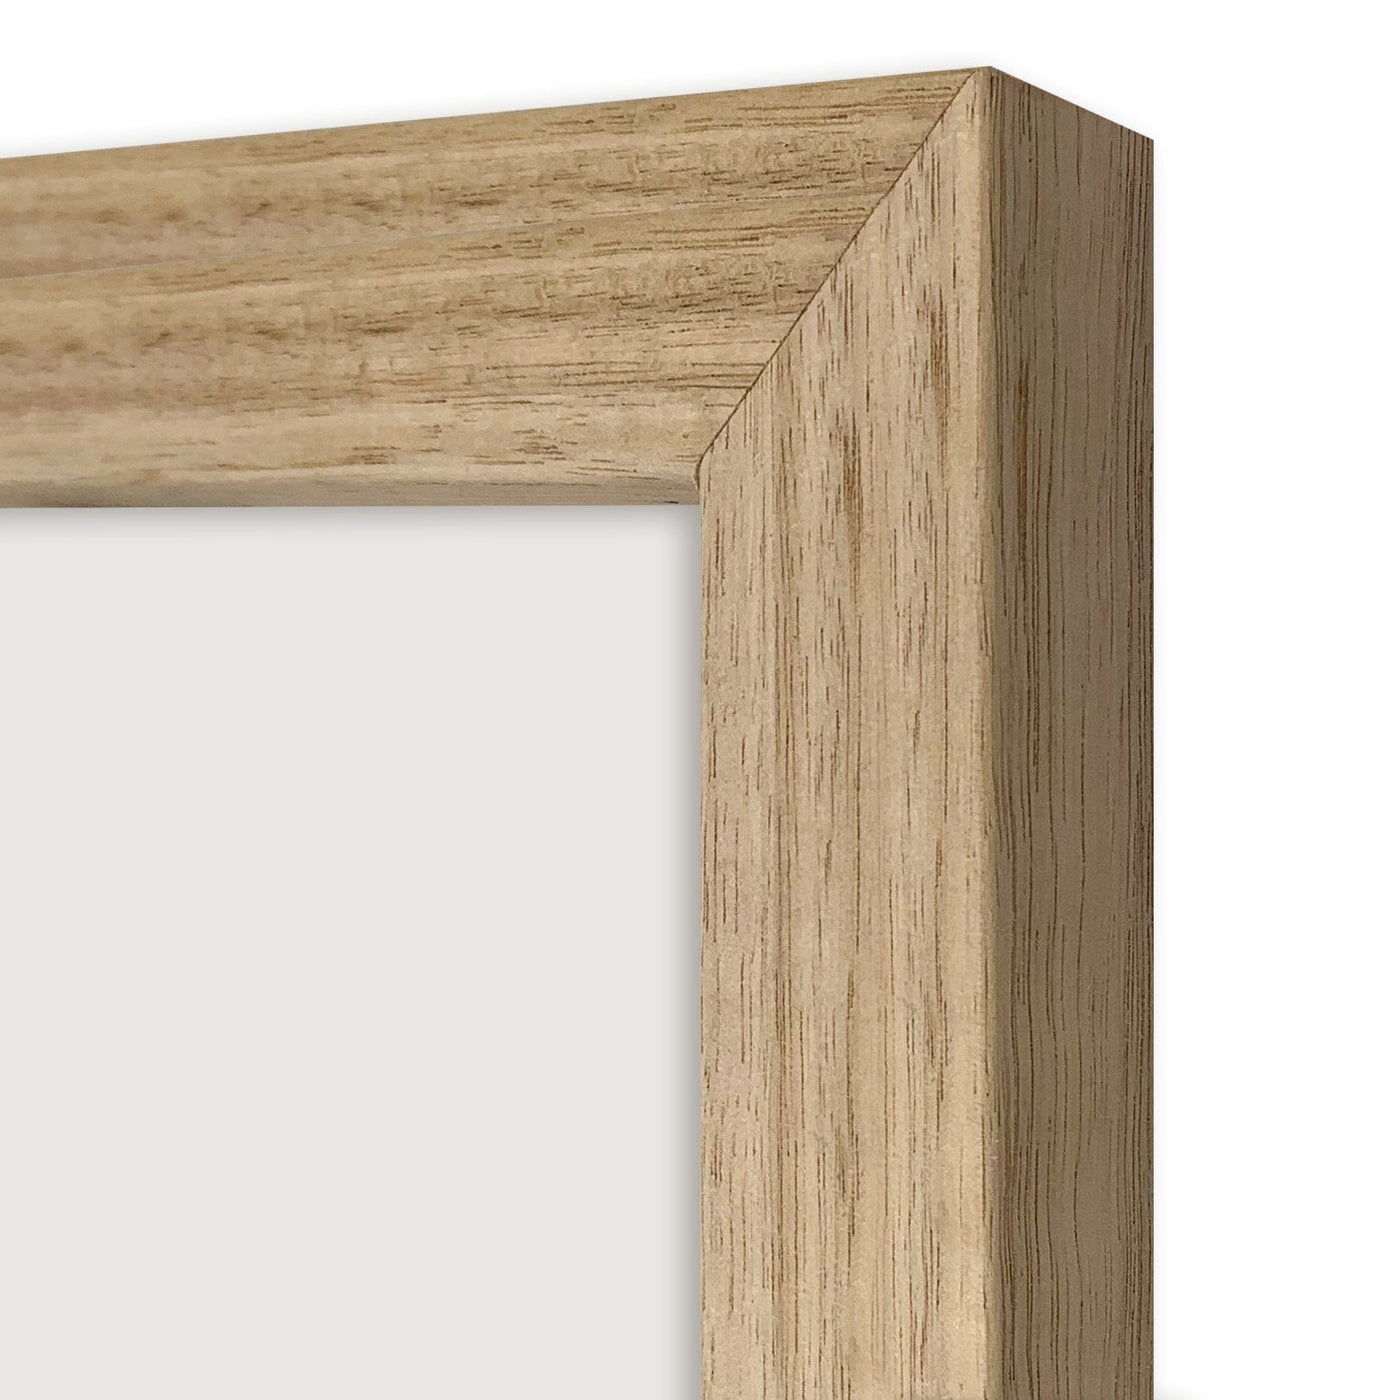 Classic Victorian Ash A1 Picture Frame to suit A2 image from our Australian Made A1 Picture Frames collection by Profile Products Australia